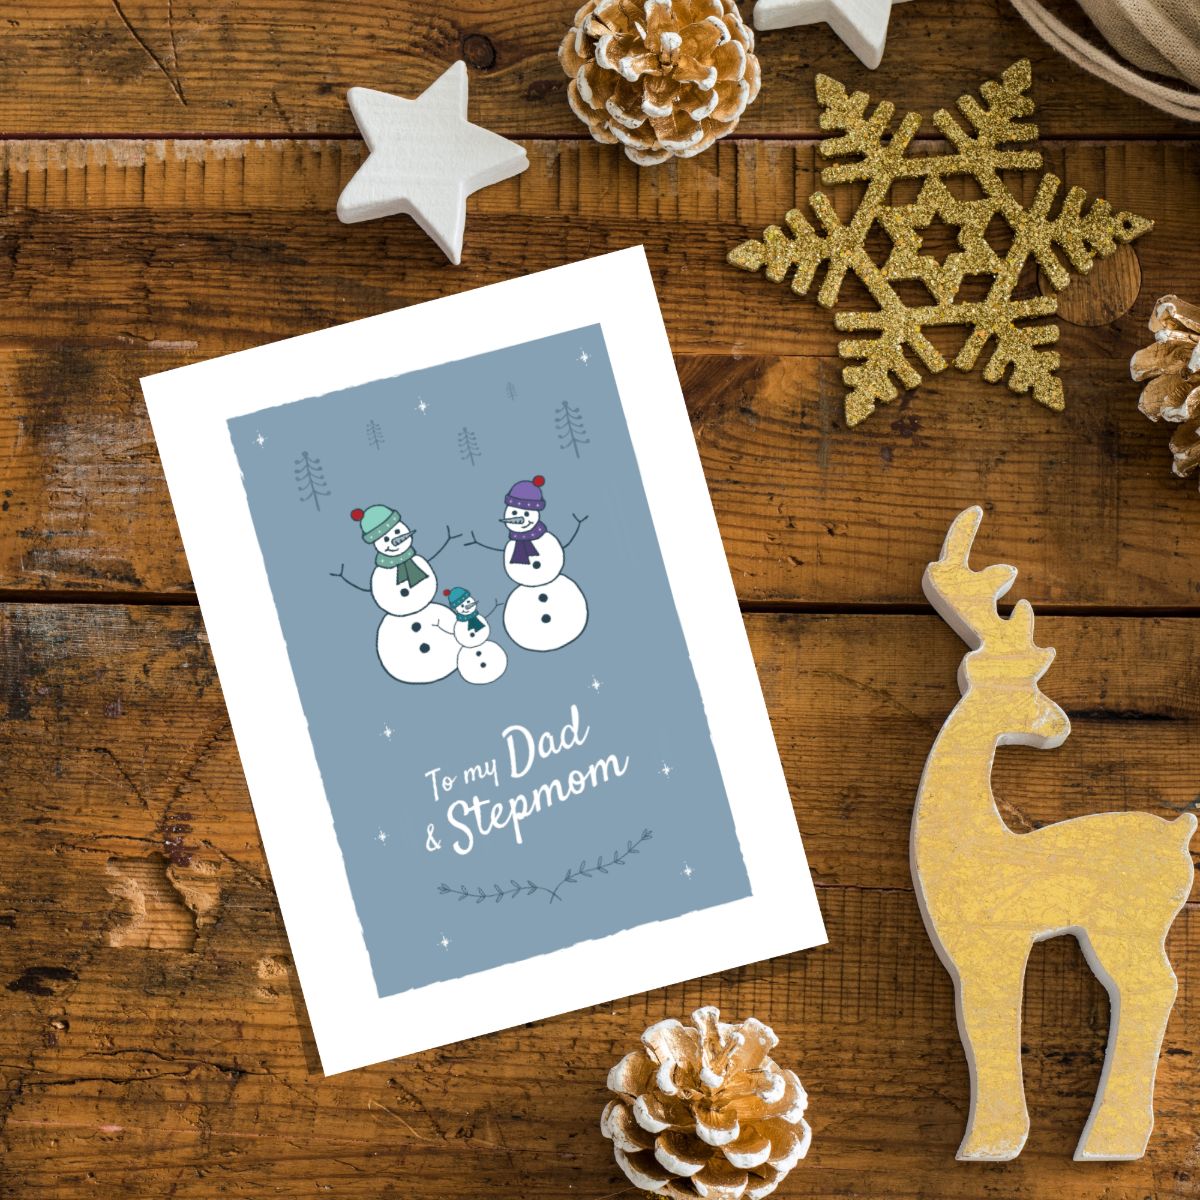 Snowmen Design Christmas Greetings Card for Dad and Partner